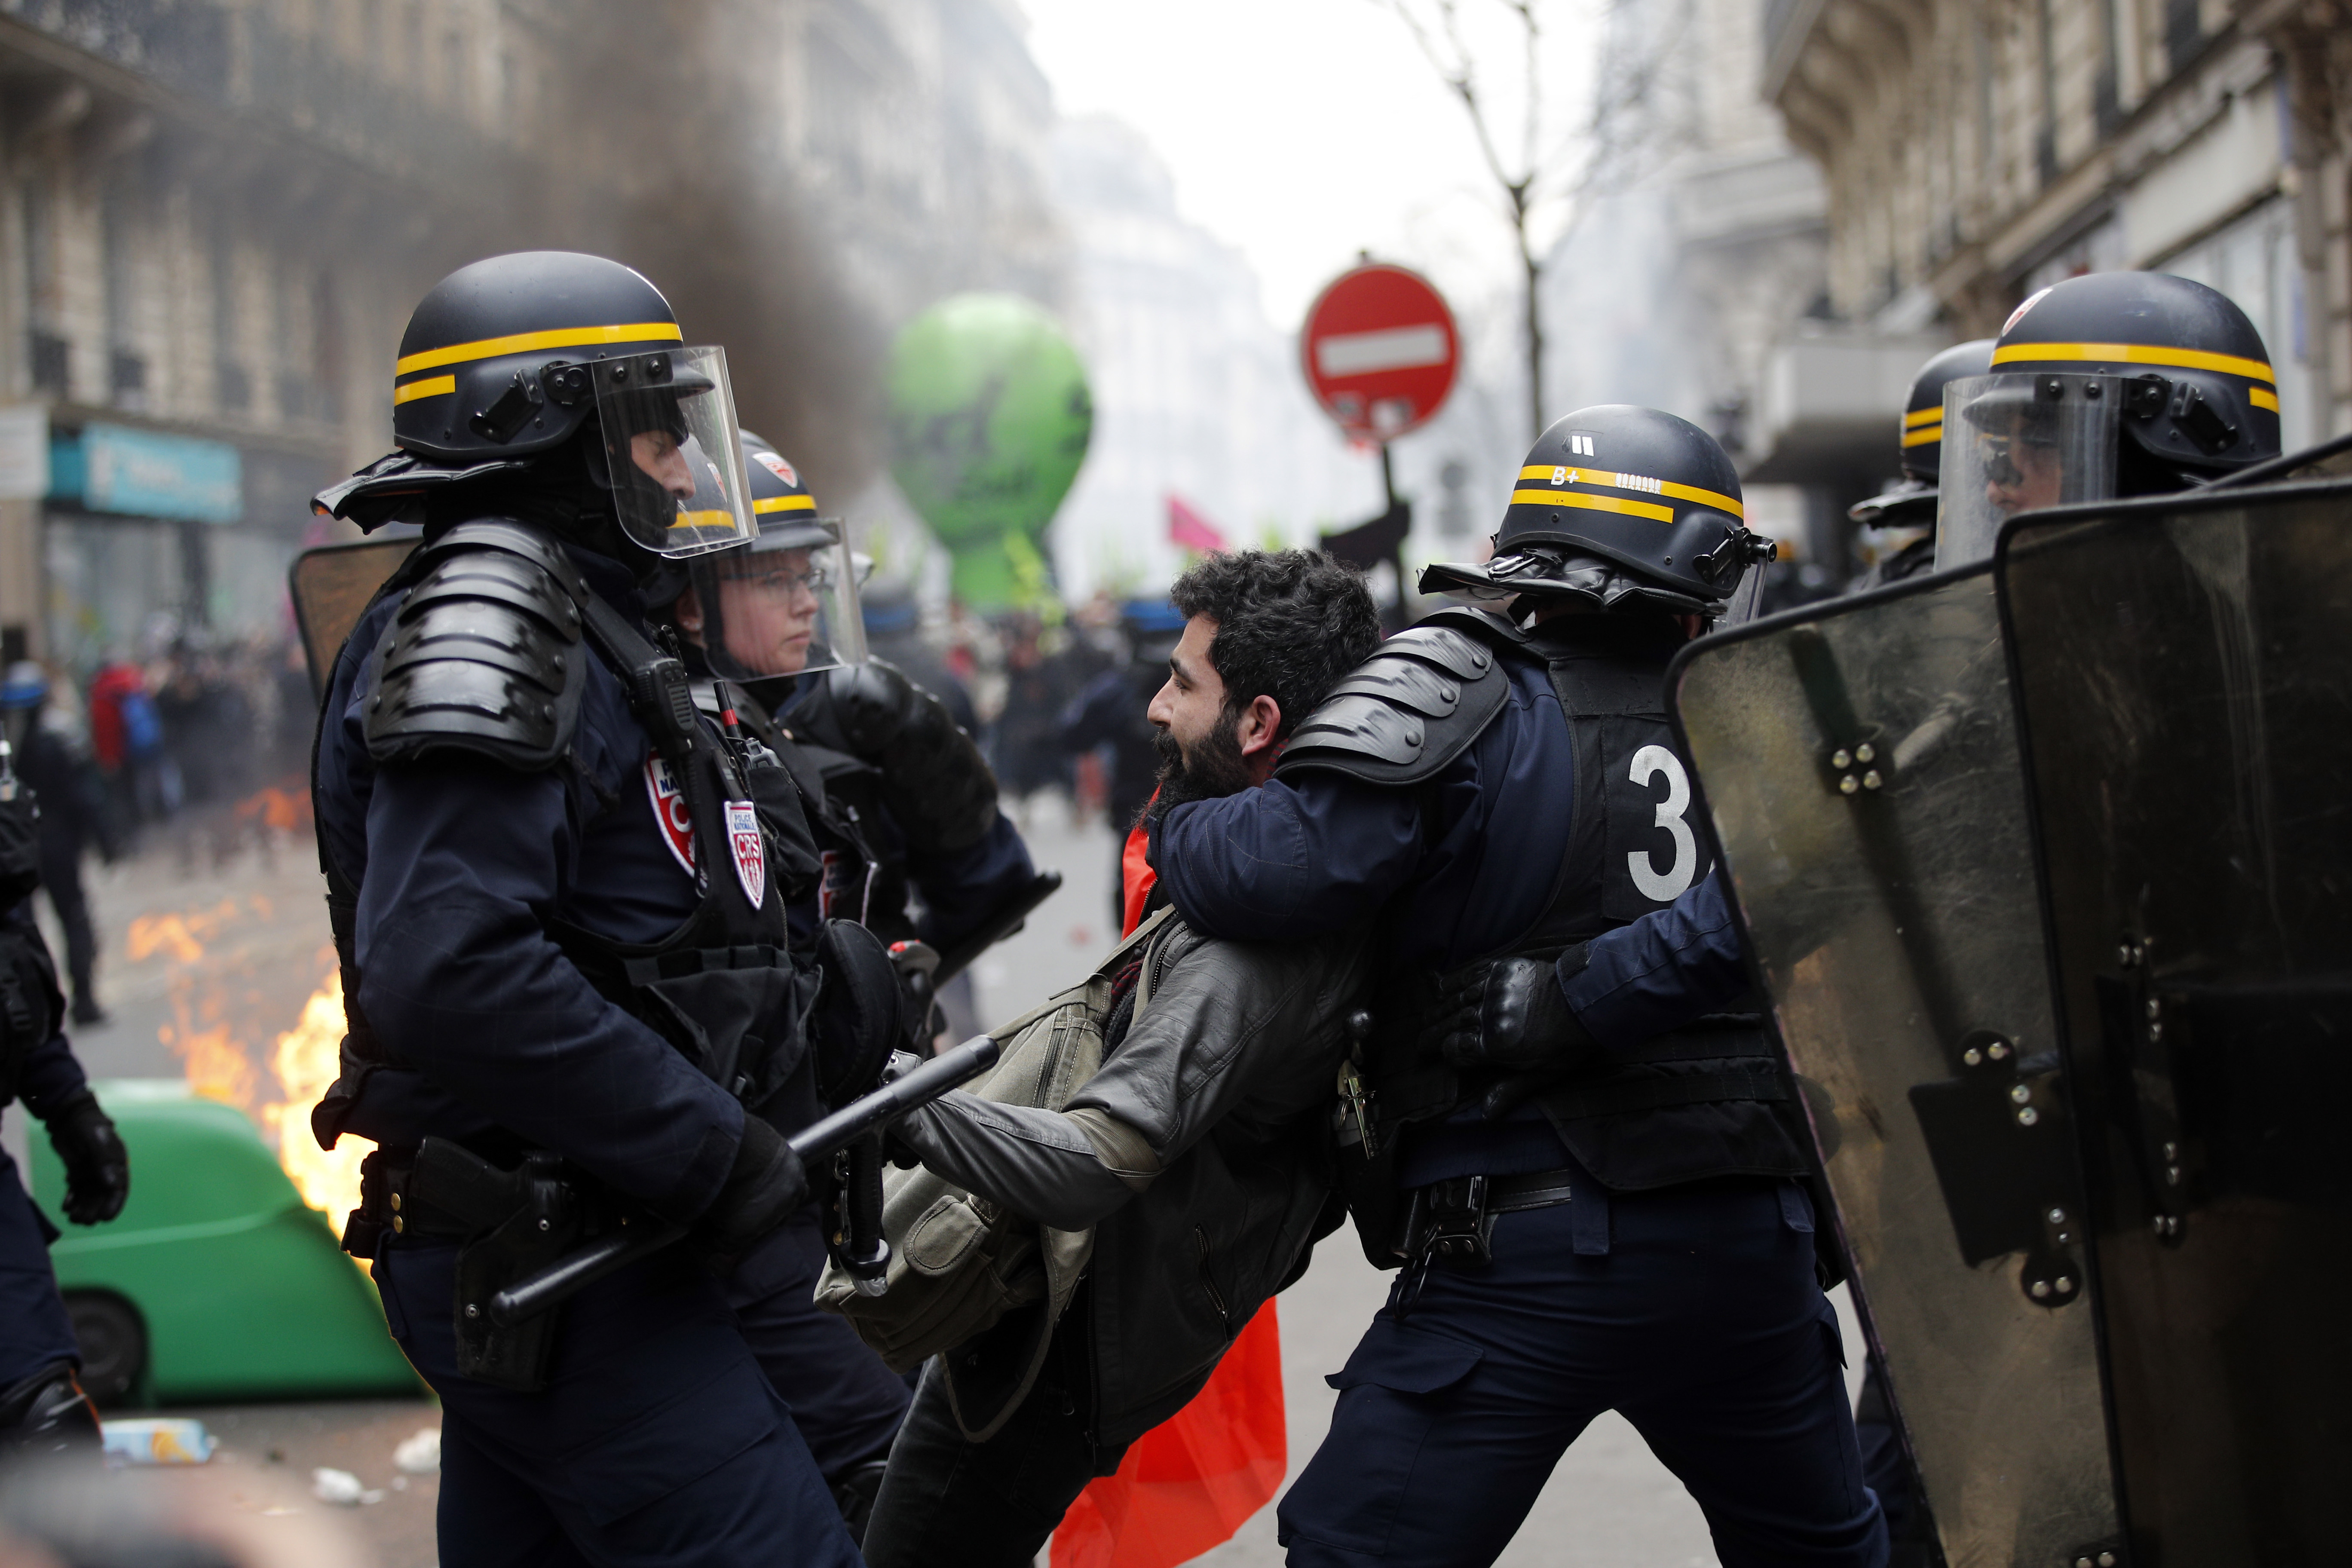 French riot police detain a protestor during a rail workers demonstration in Paris, Tuesday, April 3, 2018. French unions plan strikes two days every week through June to protest government plans to eliminate some rail worker benefits — part of broader European plans to open national railways to competition. (AP Photo/Christophe Ena)